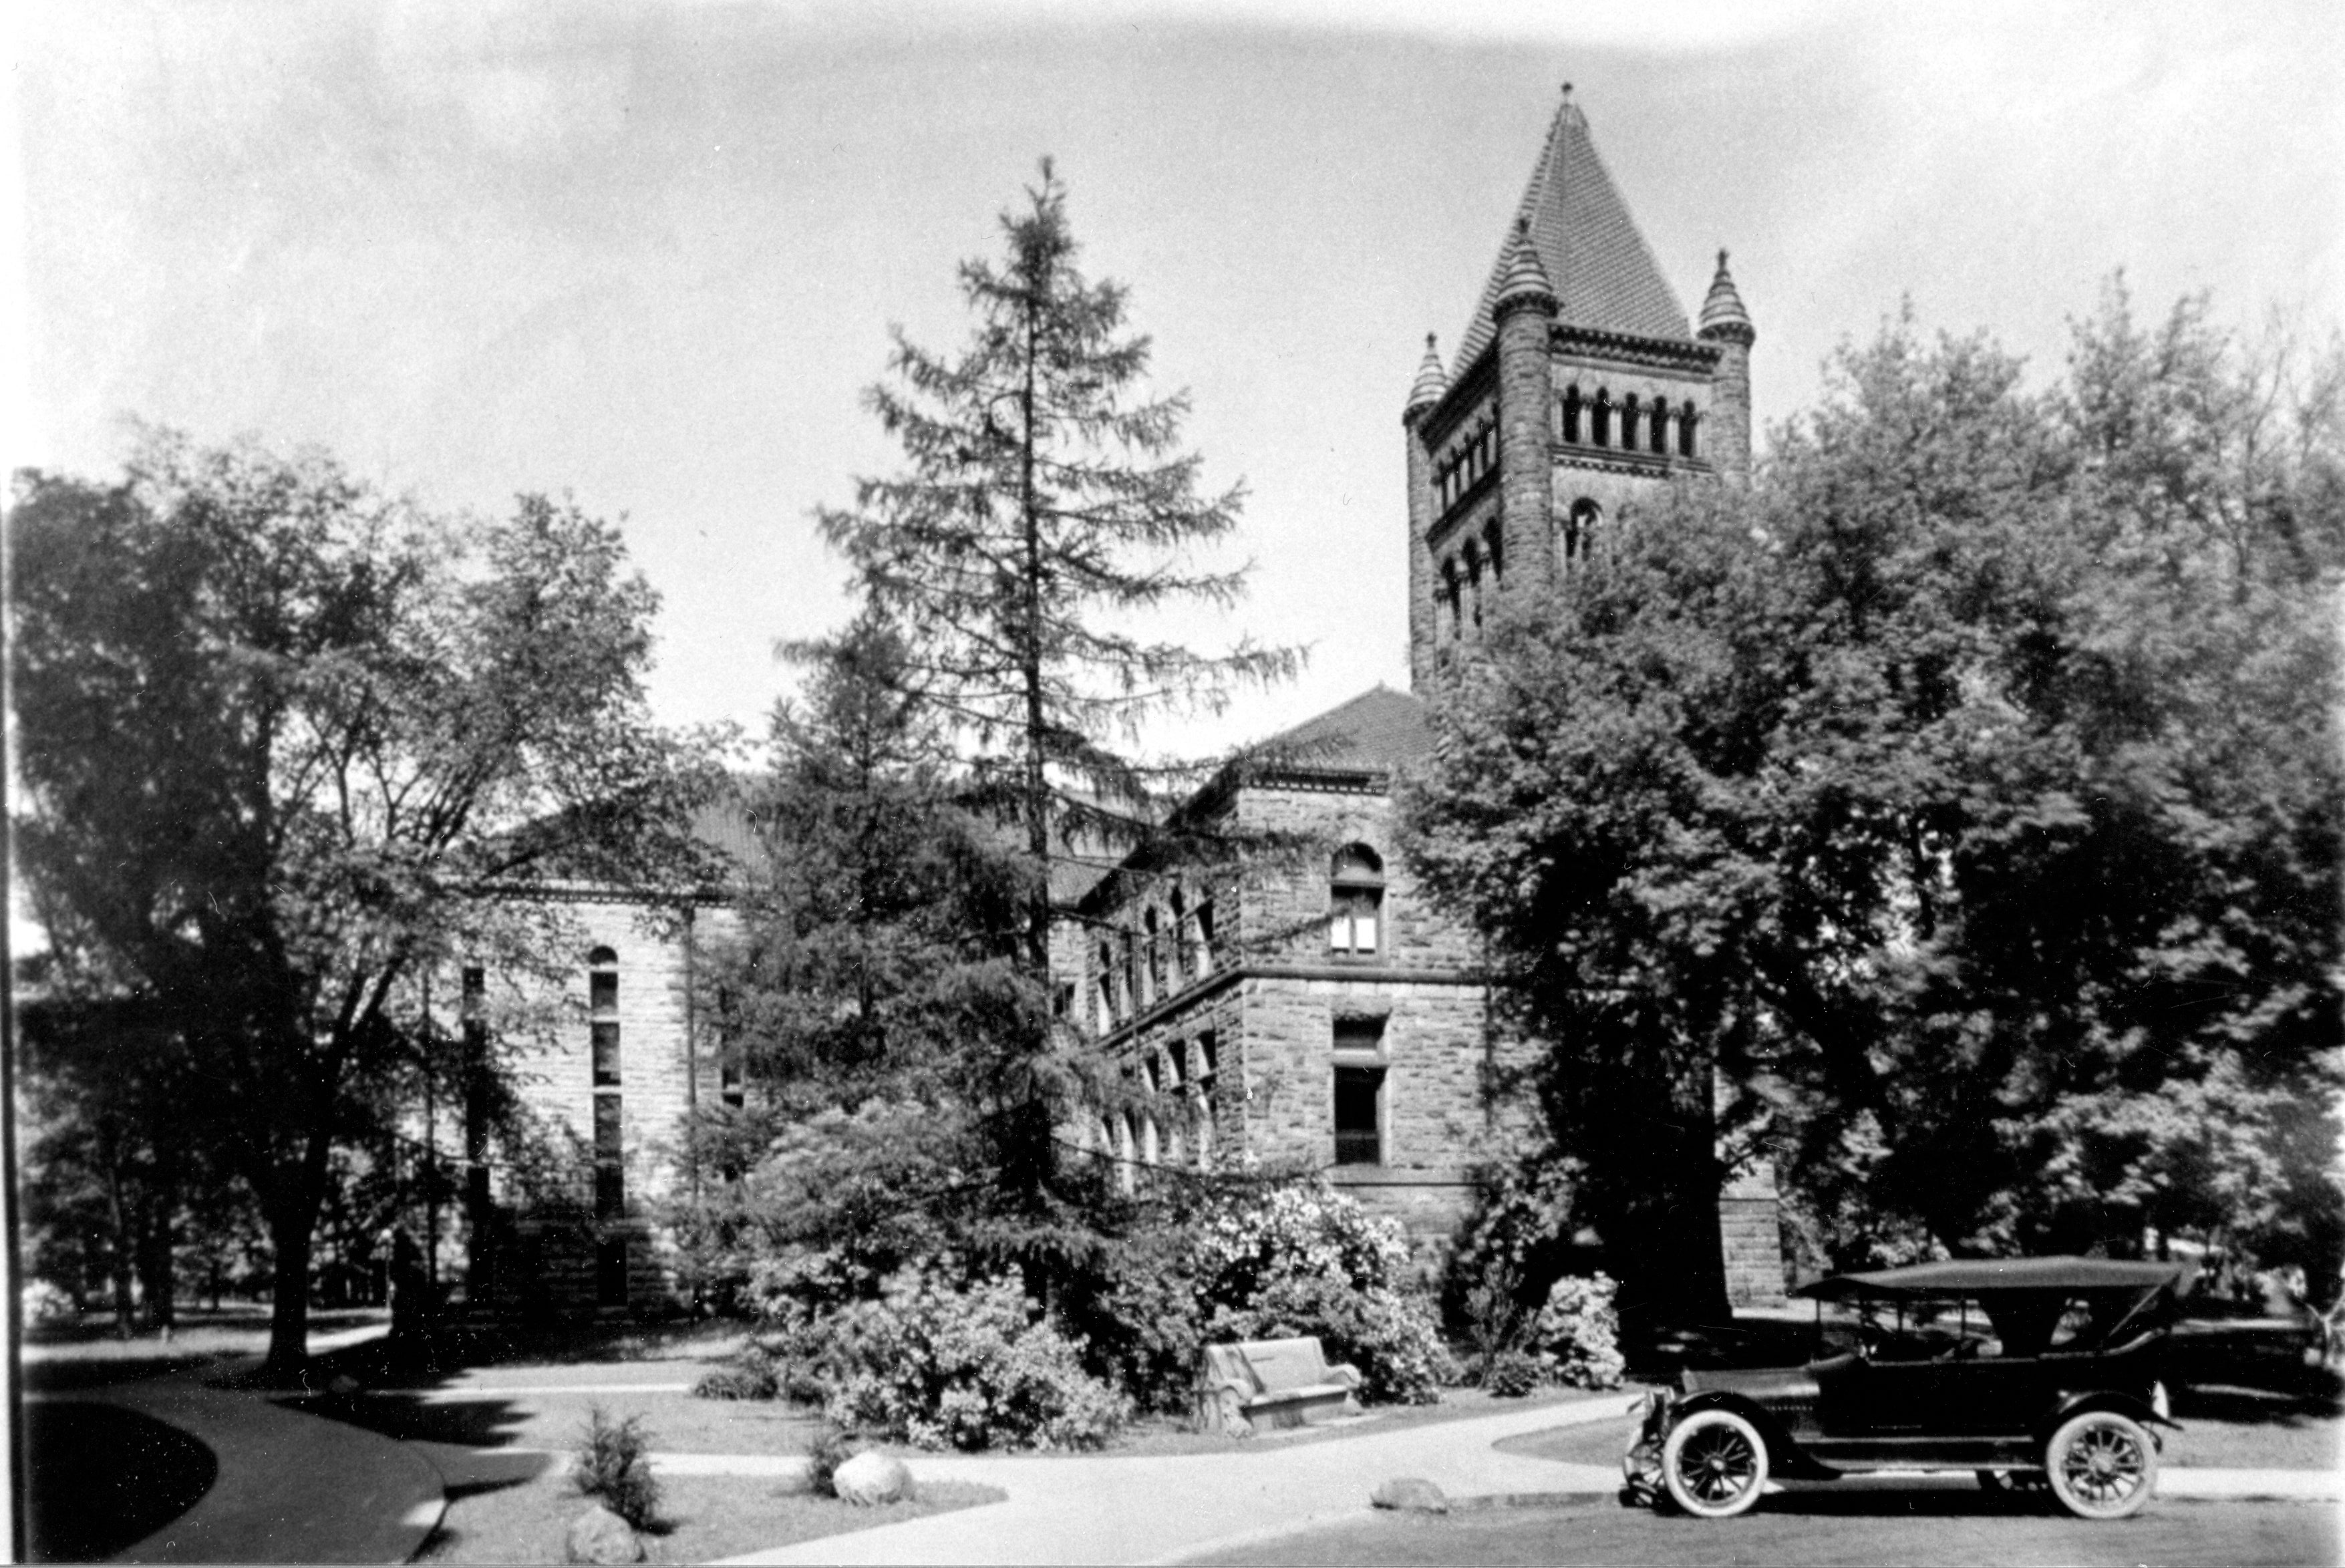 Altgeld Hall in 1915